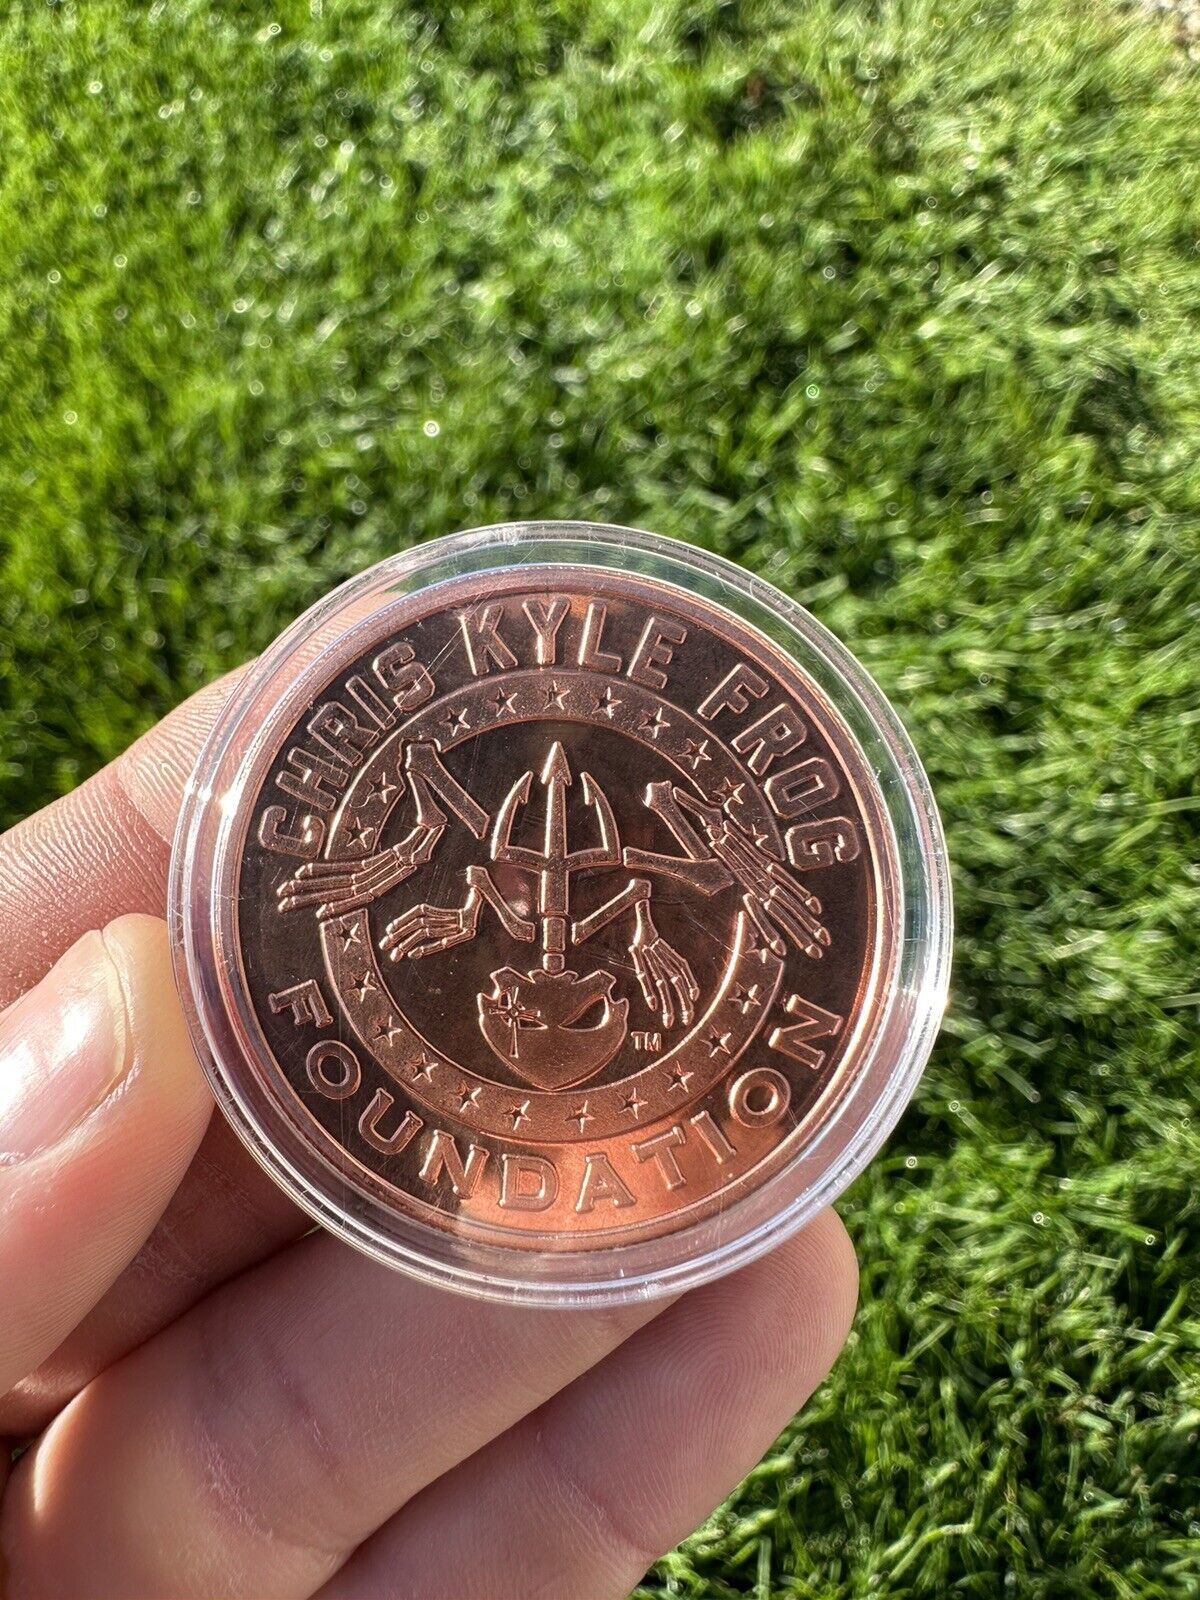 EXTREMELY RARE 🔥CHRIS KYLE FROG FOUNDATION CHALLENGE COIN Seal Team 3 Copper